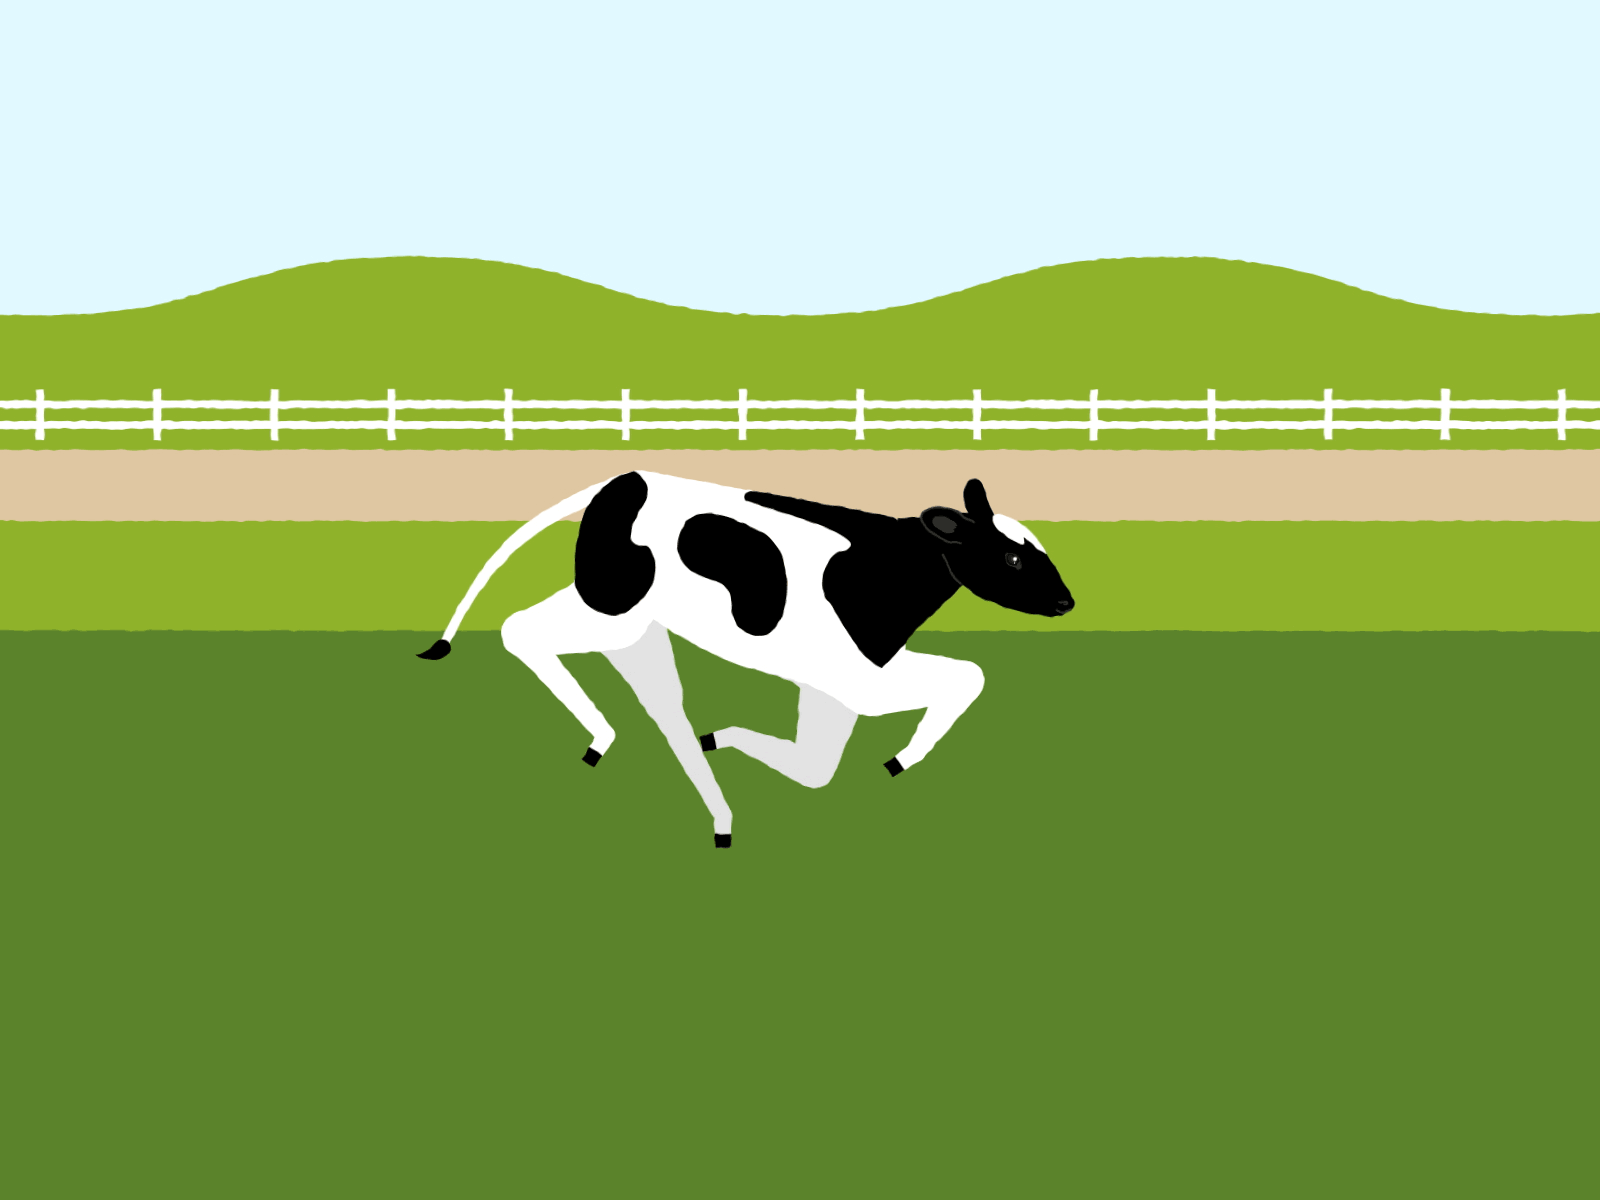 SCCL - Cow Run Loop animal animation baby calf character cow cute dairy farm farming motion movement run running running cycle